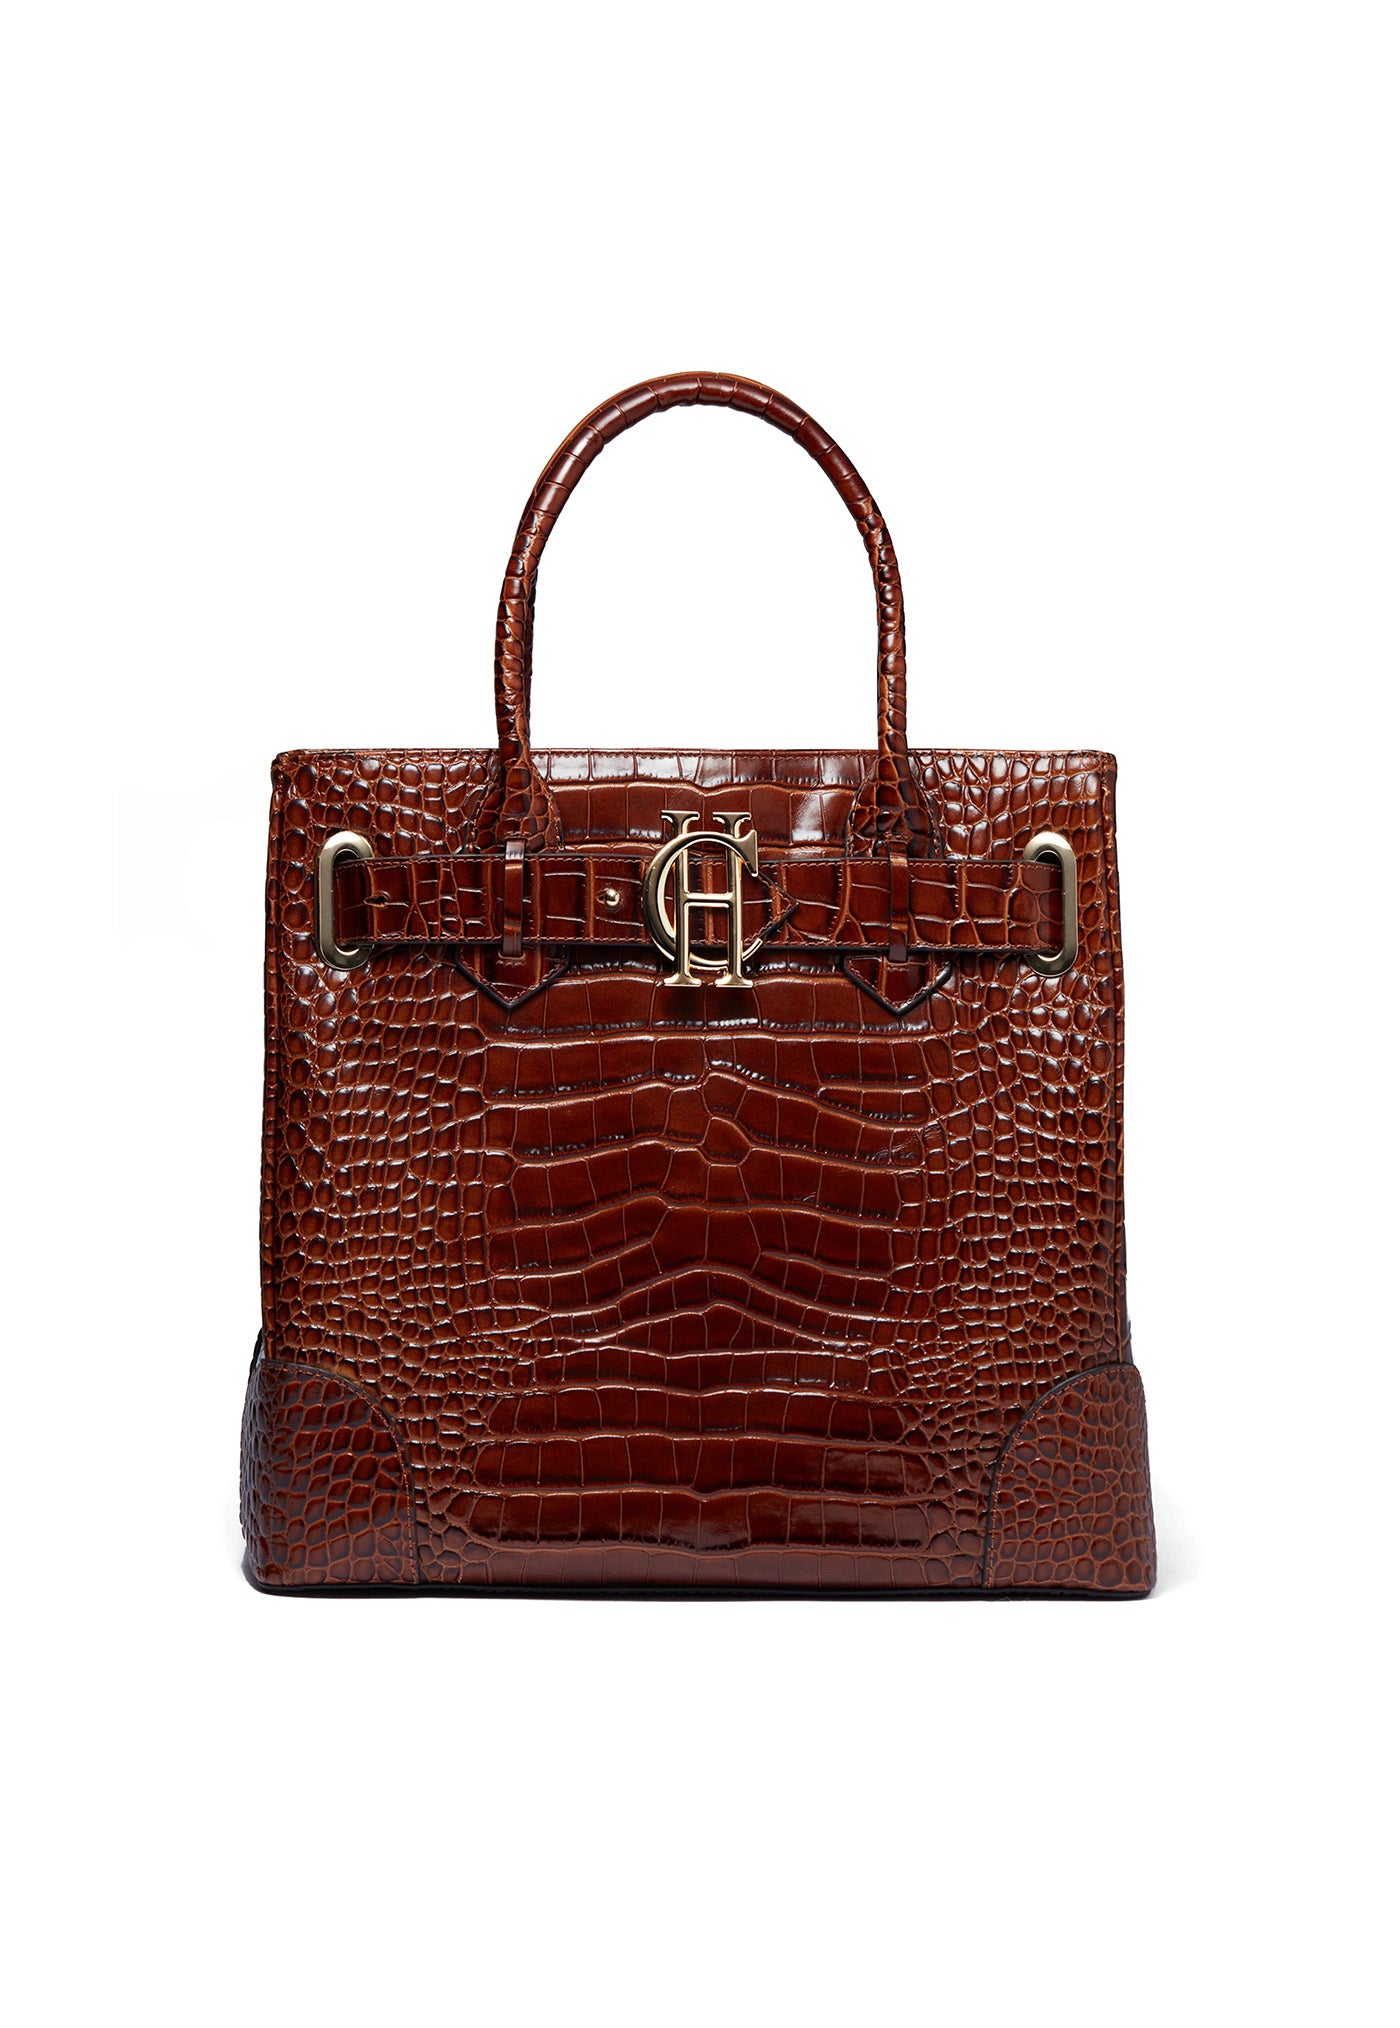 The Brompton Tote - Tan Croc sold by Angel Divine